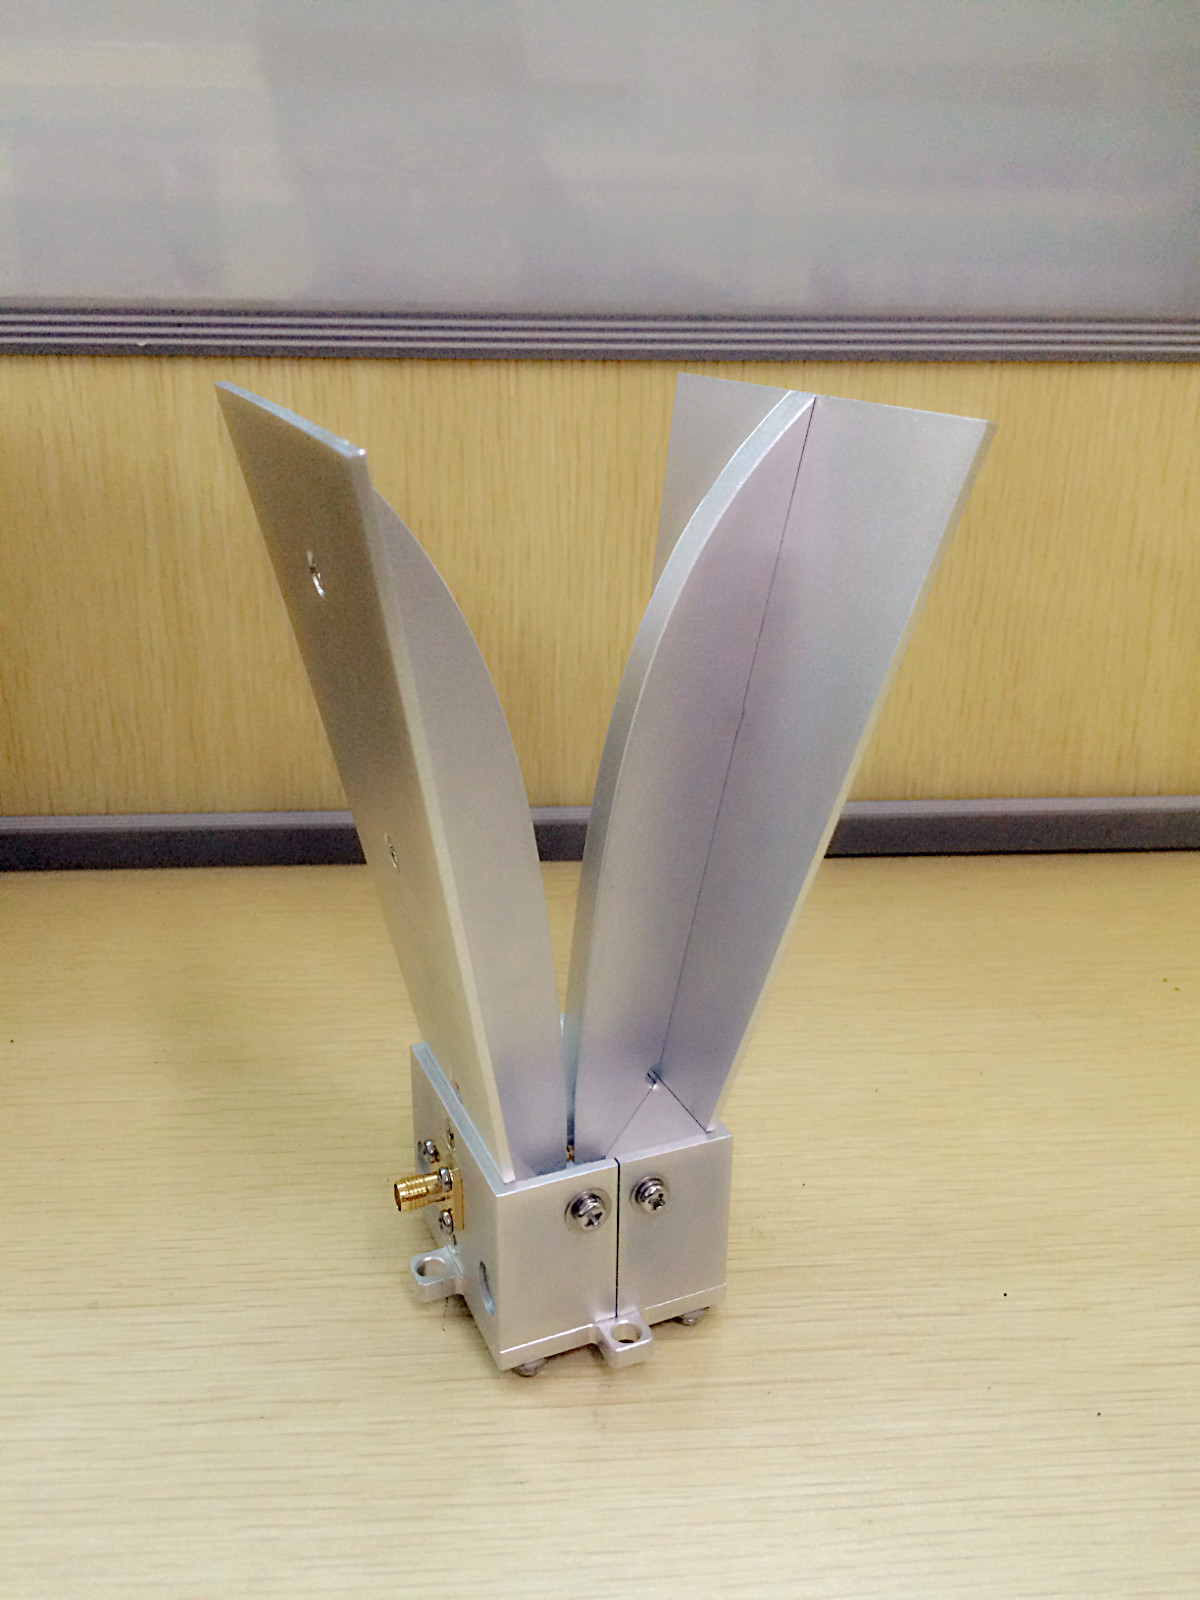 Jc-ant1080 small horn test antenna